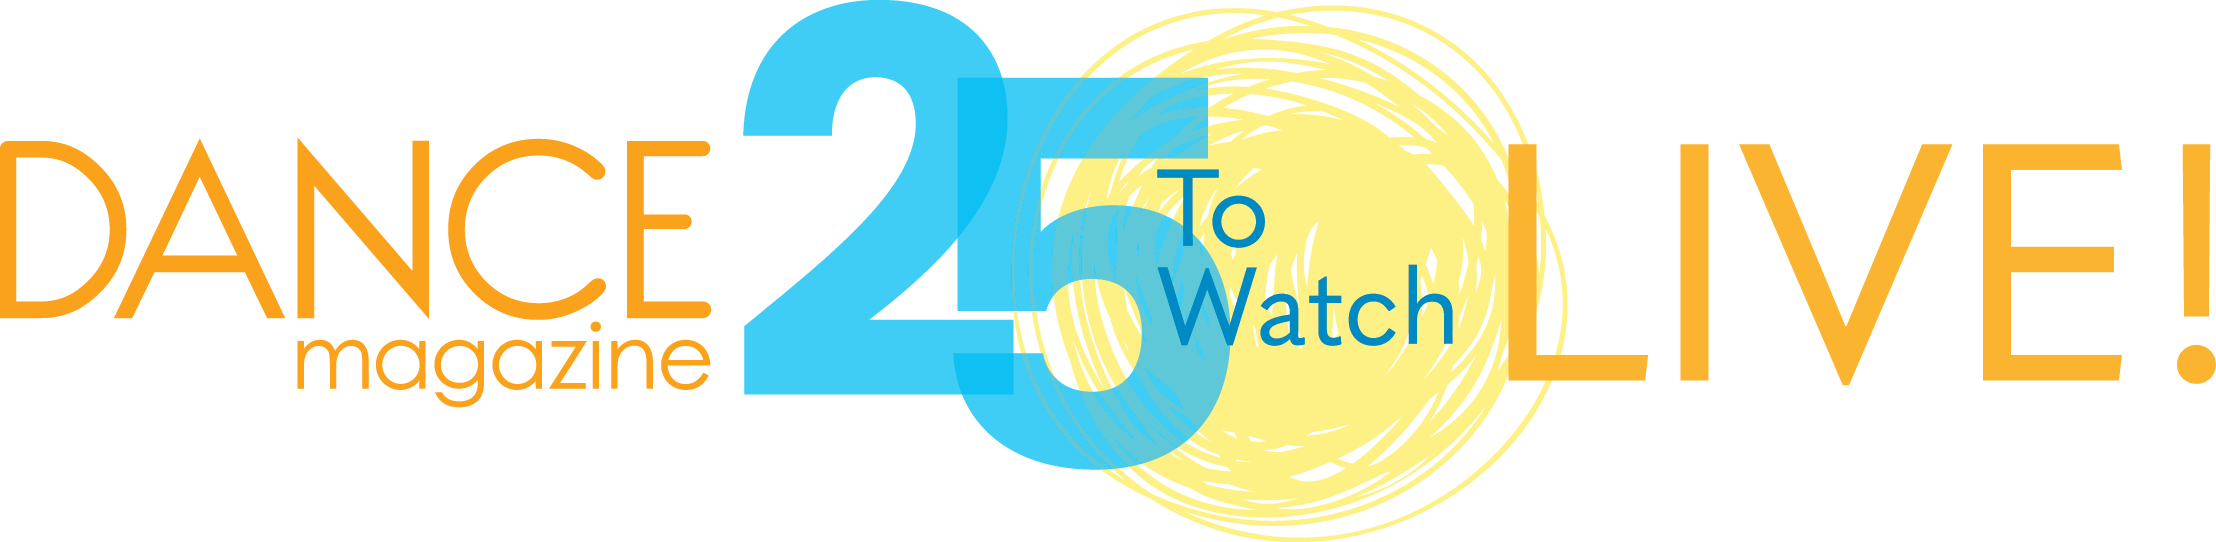 Logo with 25 to Watch in yellow and blue